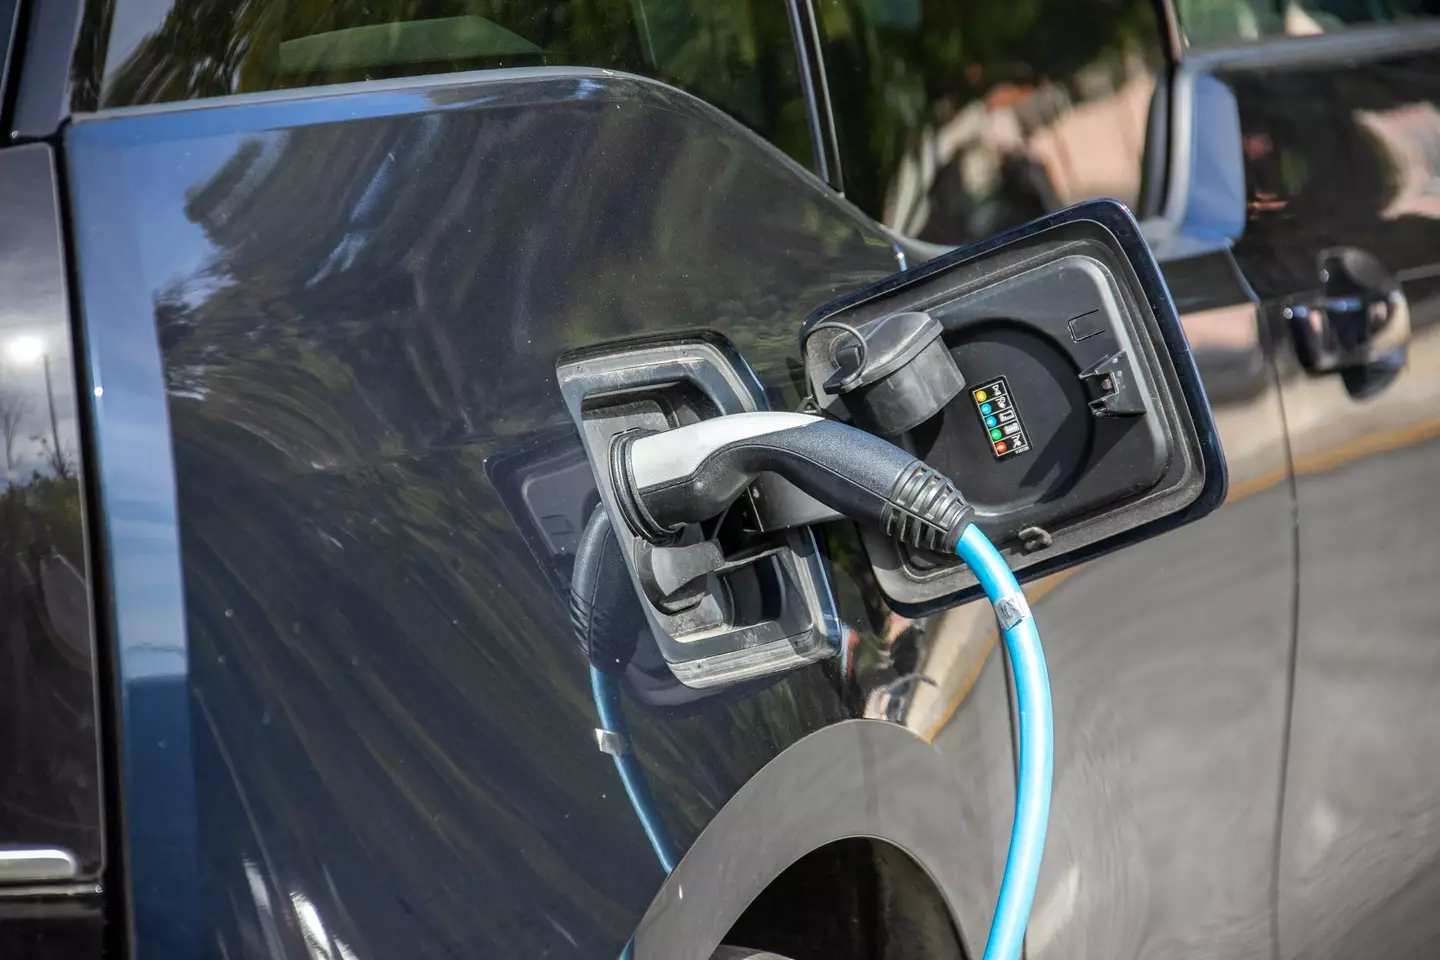 Charging points are vital if electric cars are to succeed.